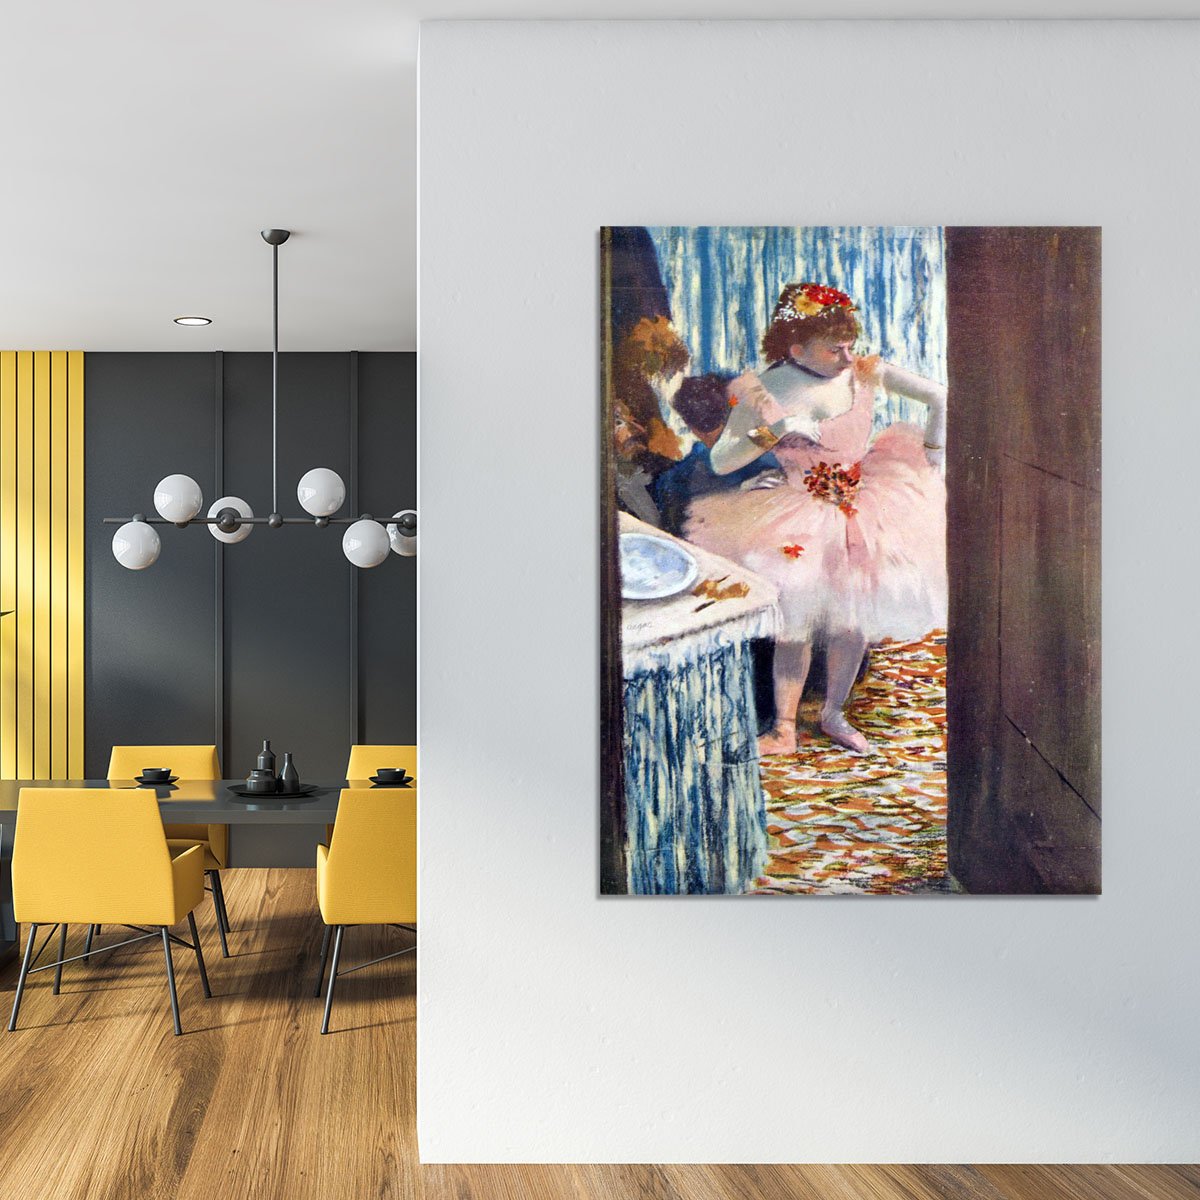 Dancer in the Loge by Degas Canvas Print or Poster